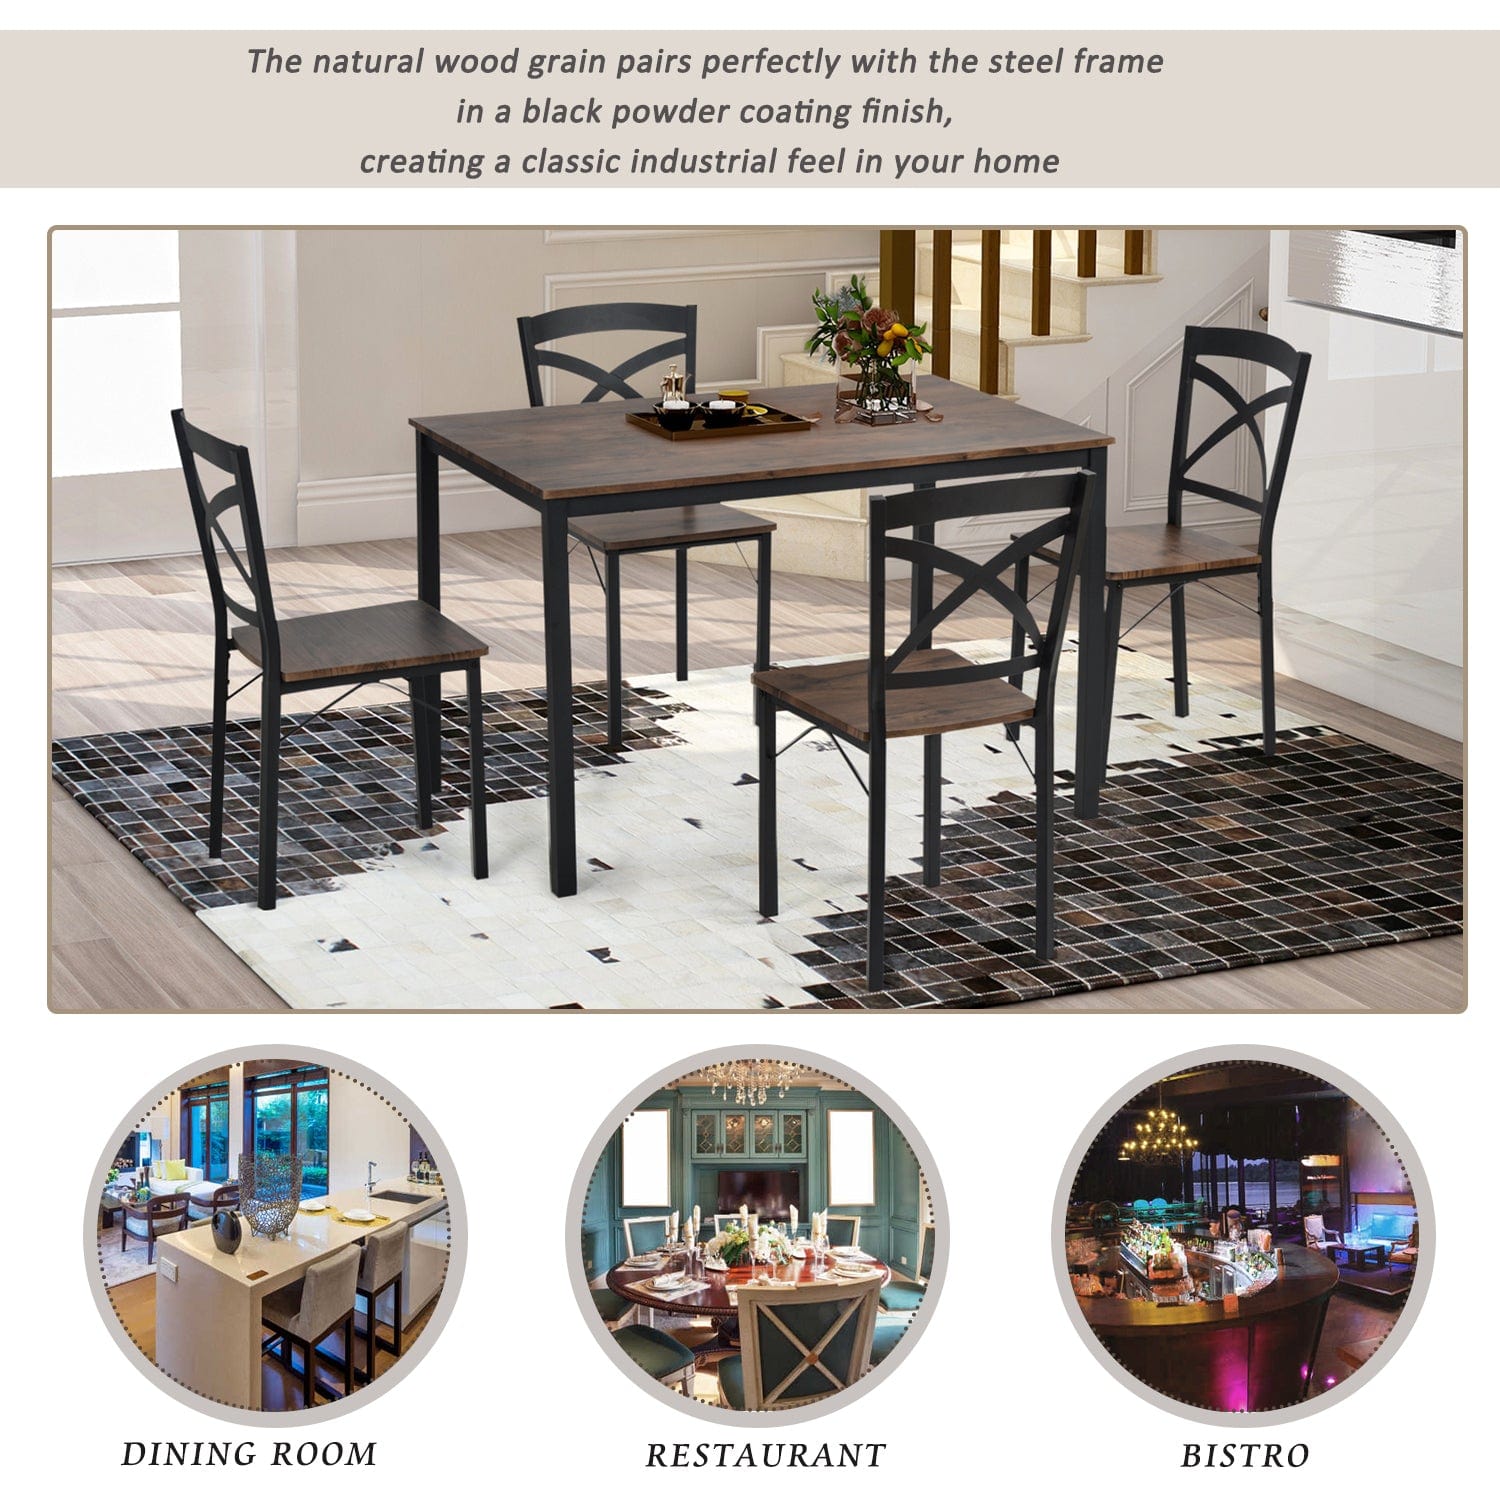 1st Choice Furniture Direct Dining Set 1st Choice 5- Piece Brown Wooden Dining Set with Table and 4 Chairs